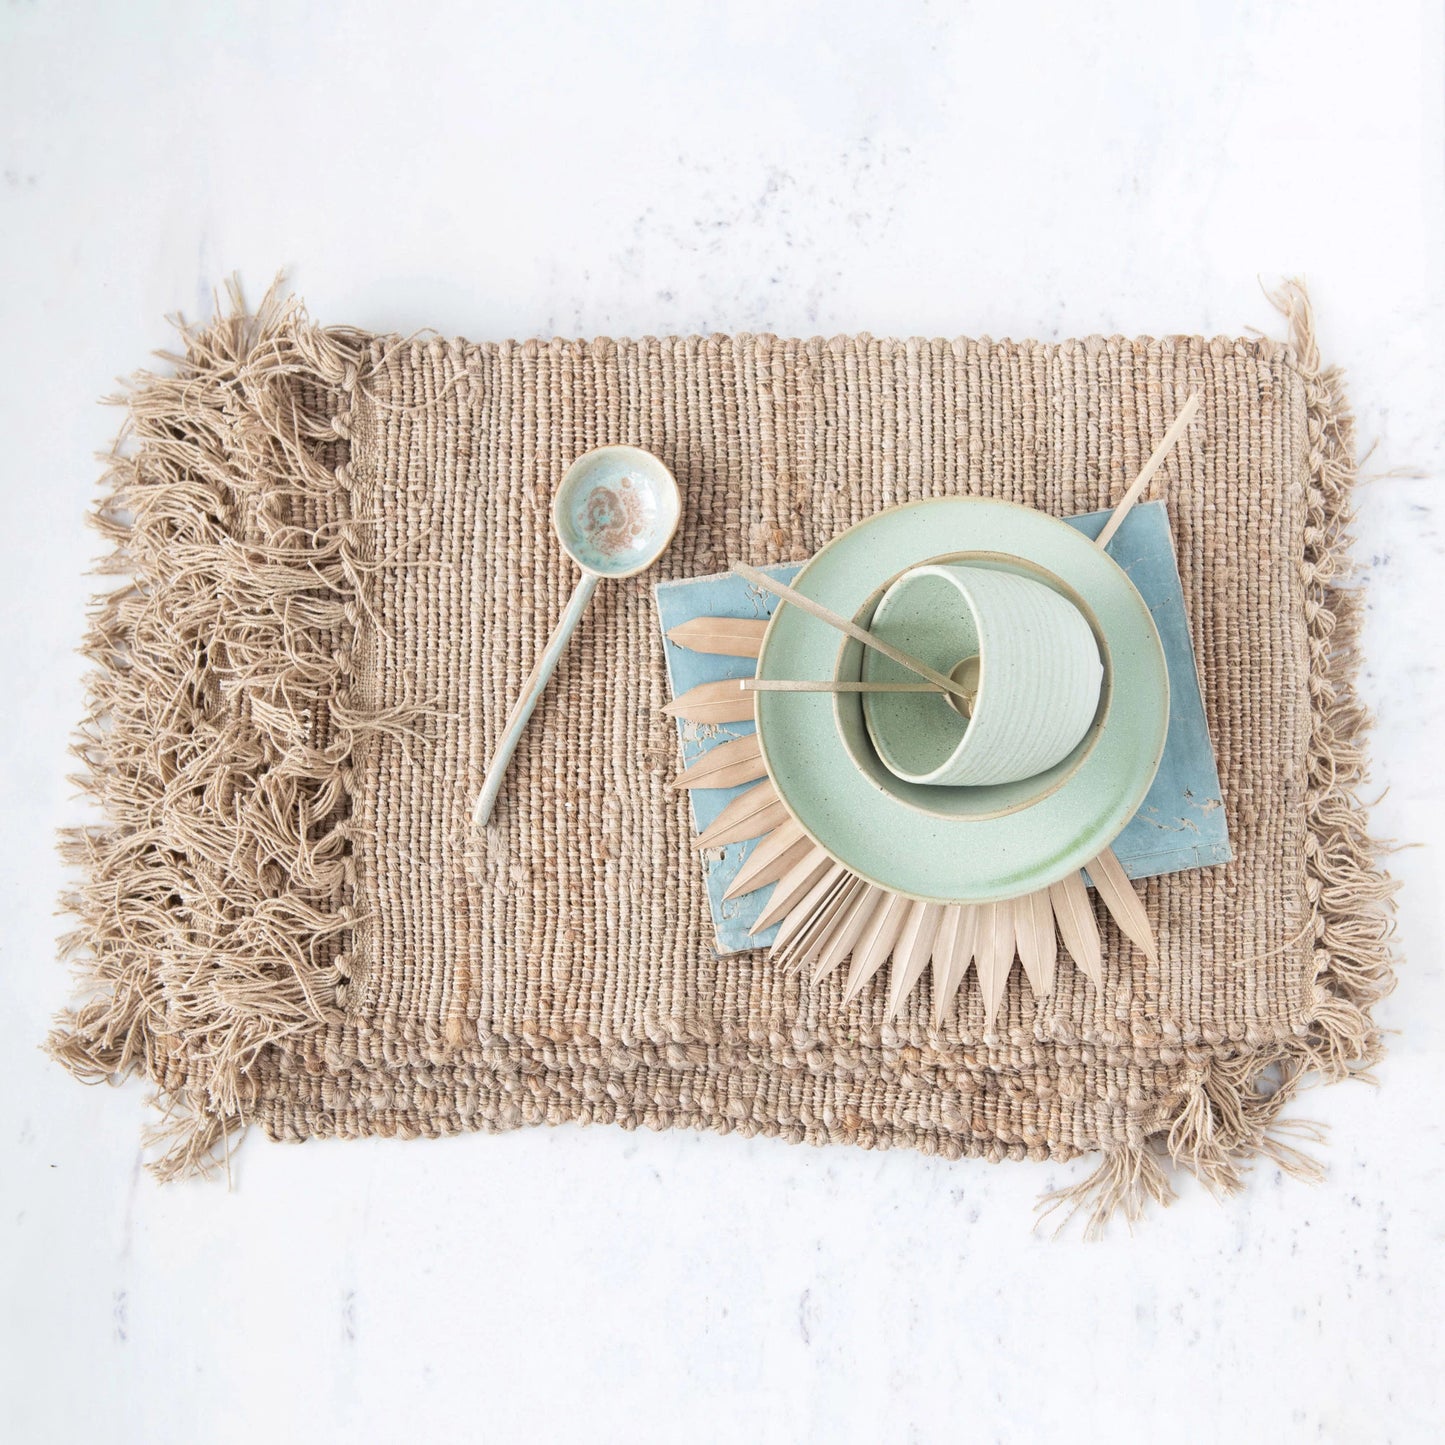 COTTON AND JUTE PLACEMAT